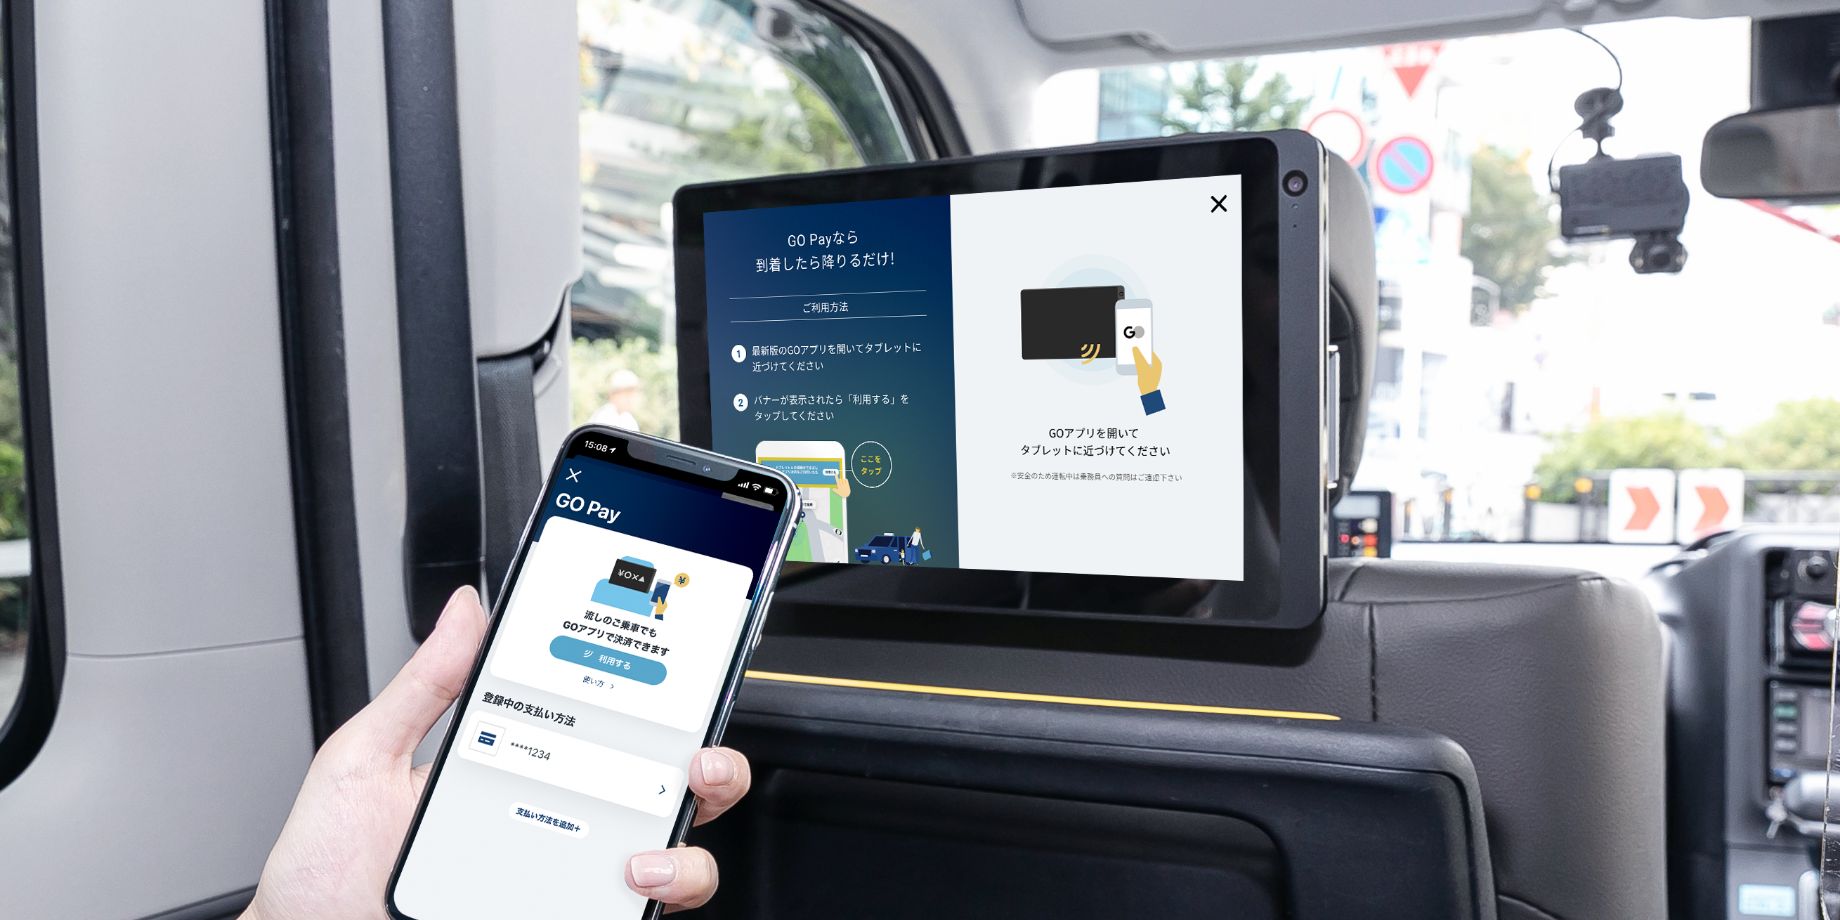 In-vehicle accessories including a tablet